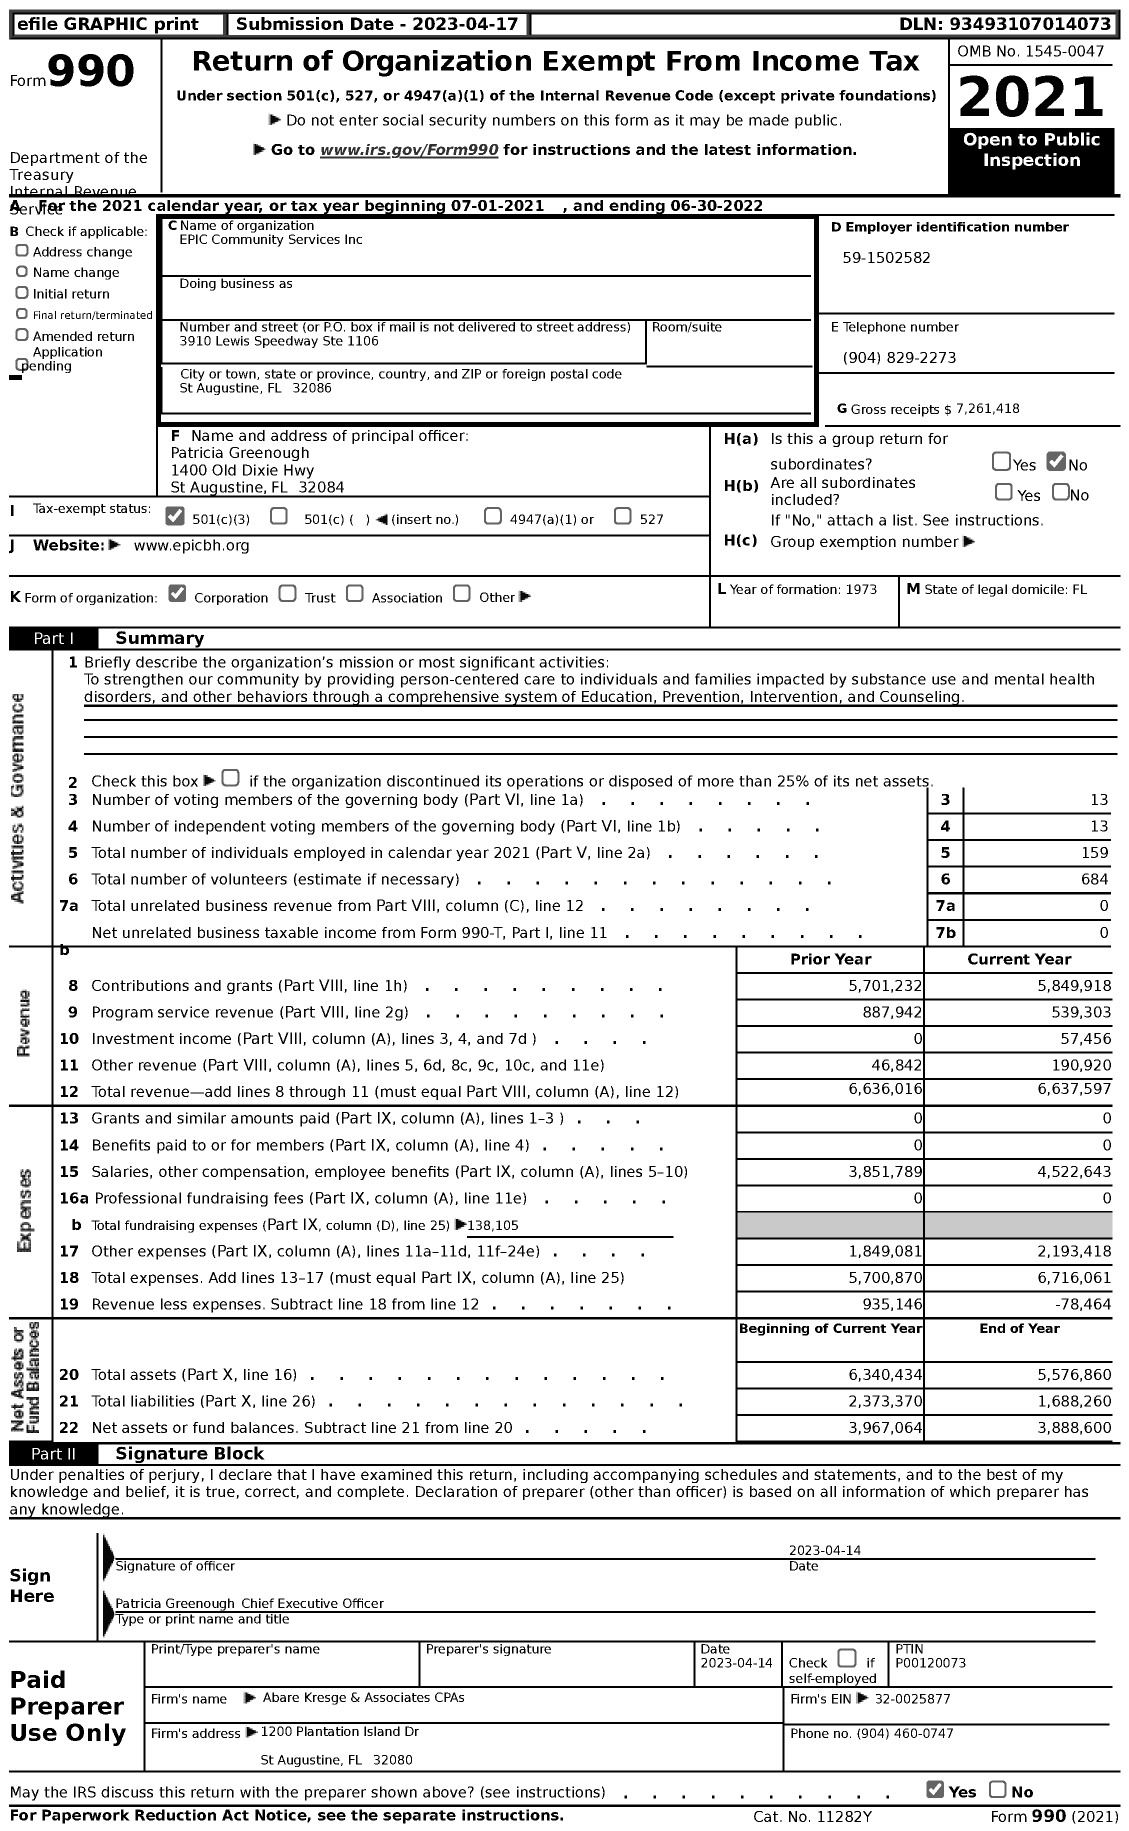 Image of first page of 2021 Form 990 for EPIC Community Services